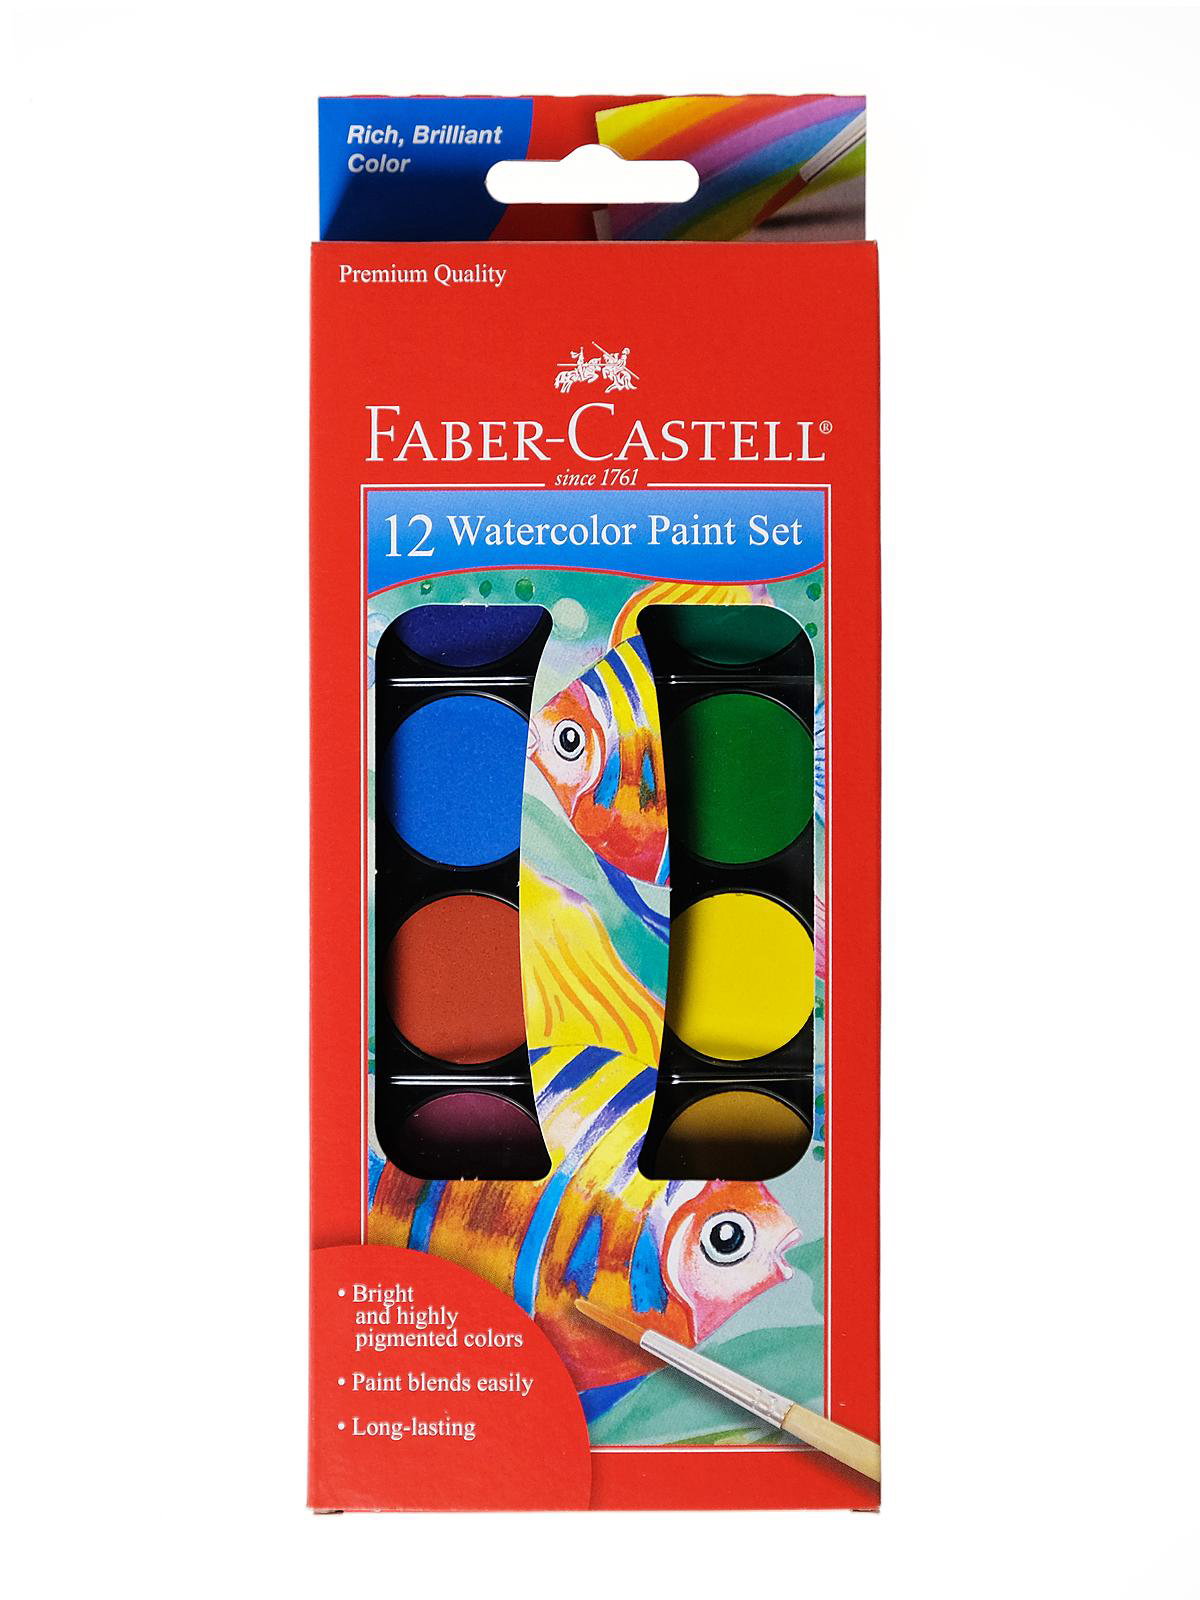 Discover more than 75 faber castell watercolor cakes best - in.daotaonec